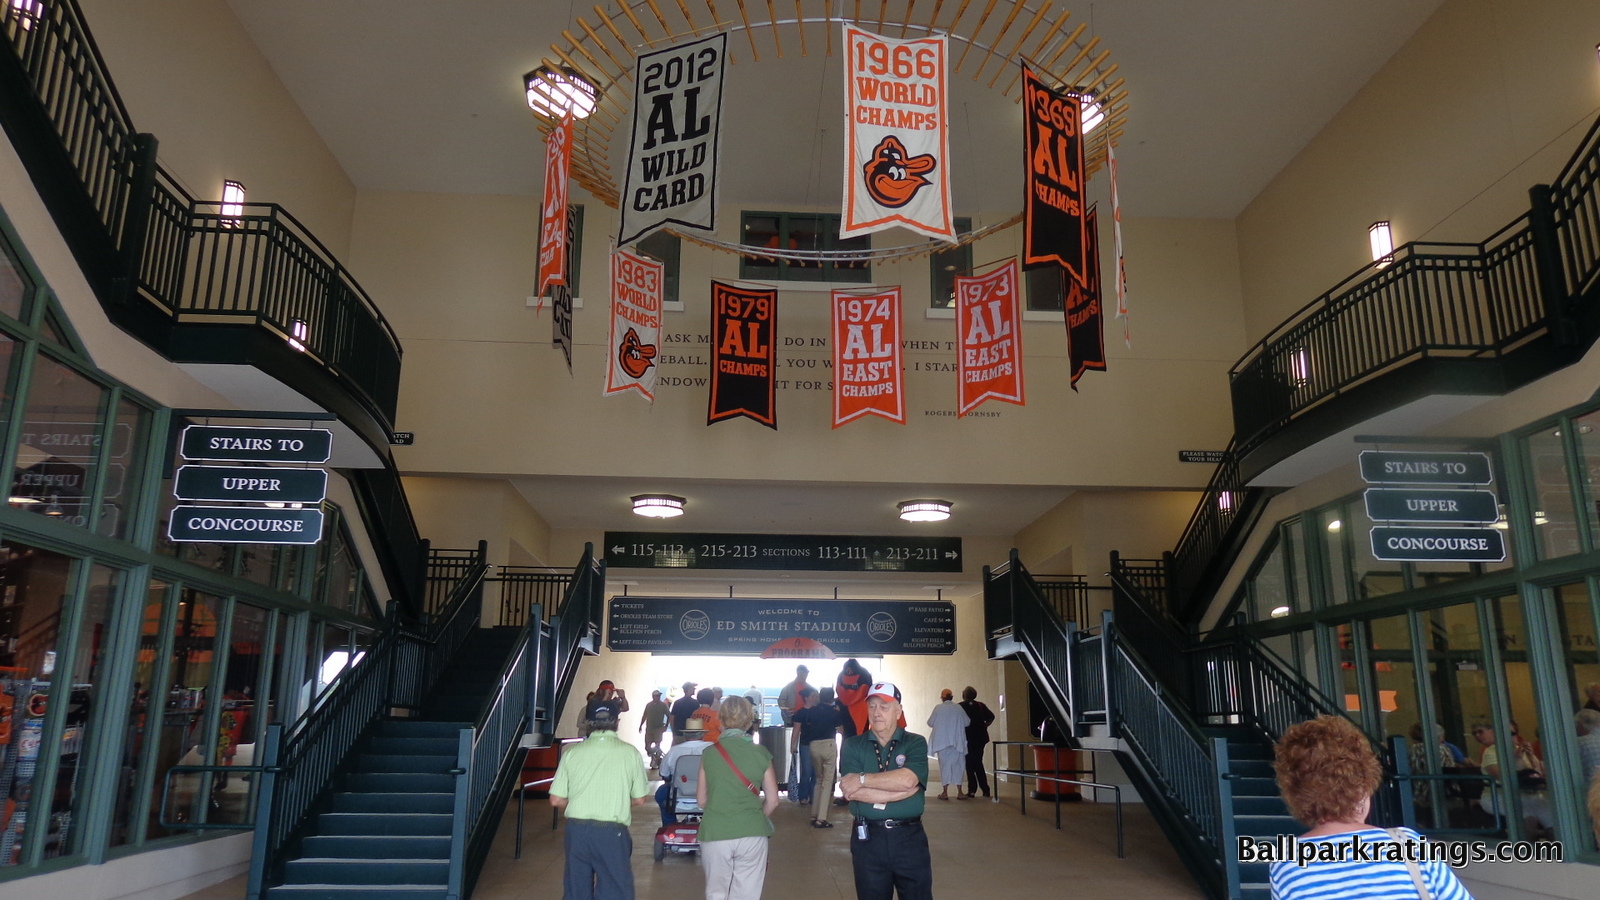 Ed Smith Stadium bat chandelier with pennant banners.